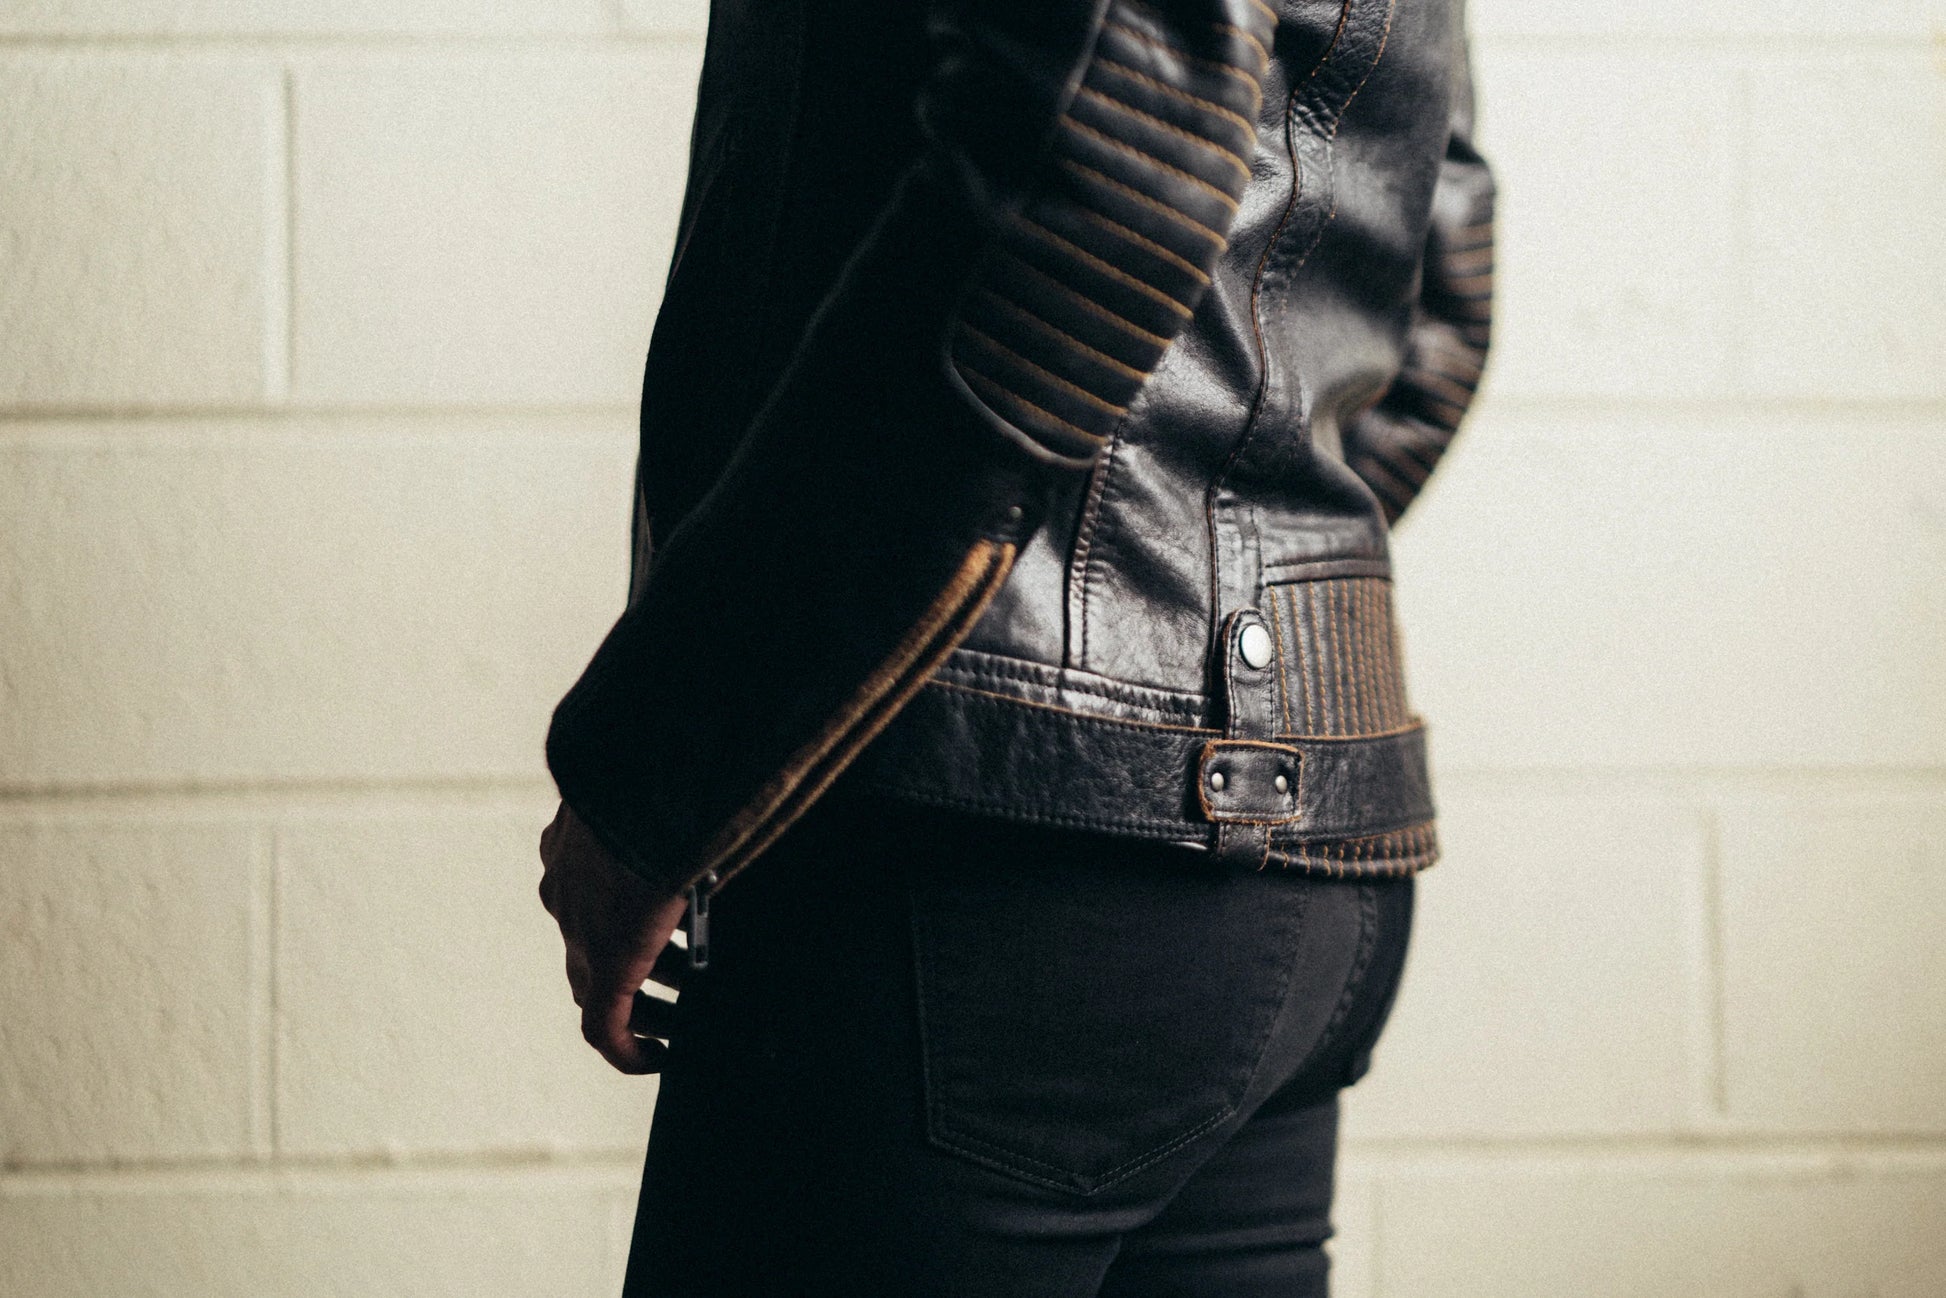 Back view of woman wearing Electra Leather Motorcycle Jacket, highlighting the design and silhouette from behind.